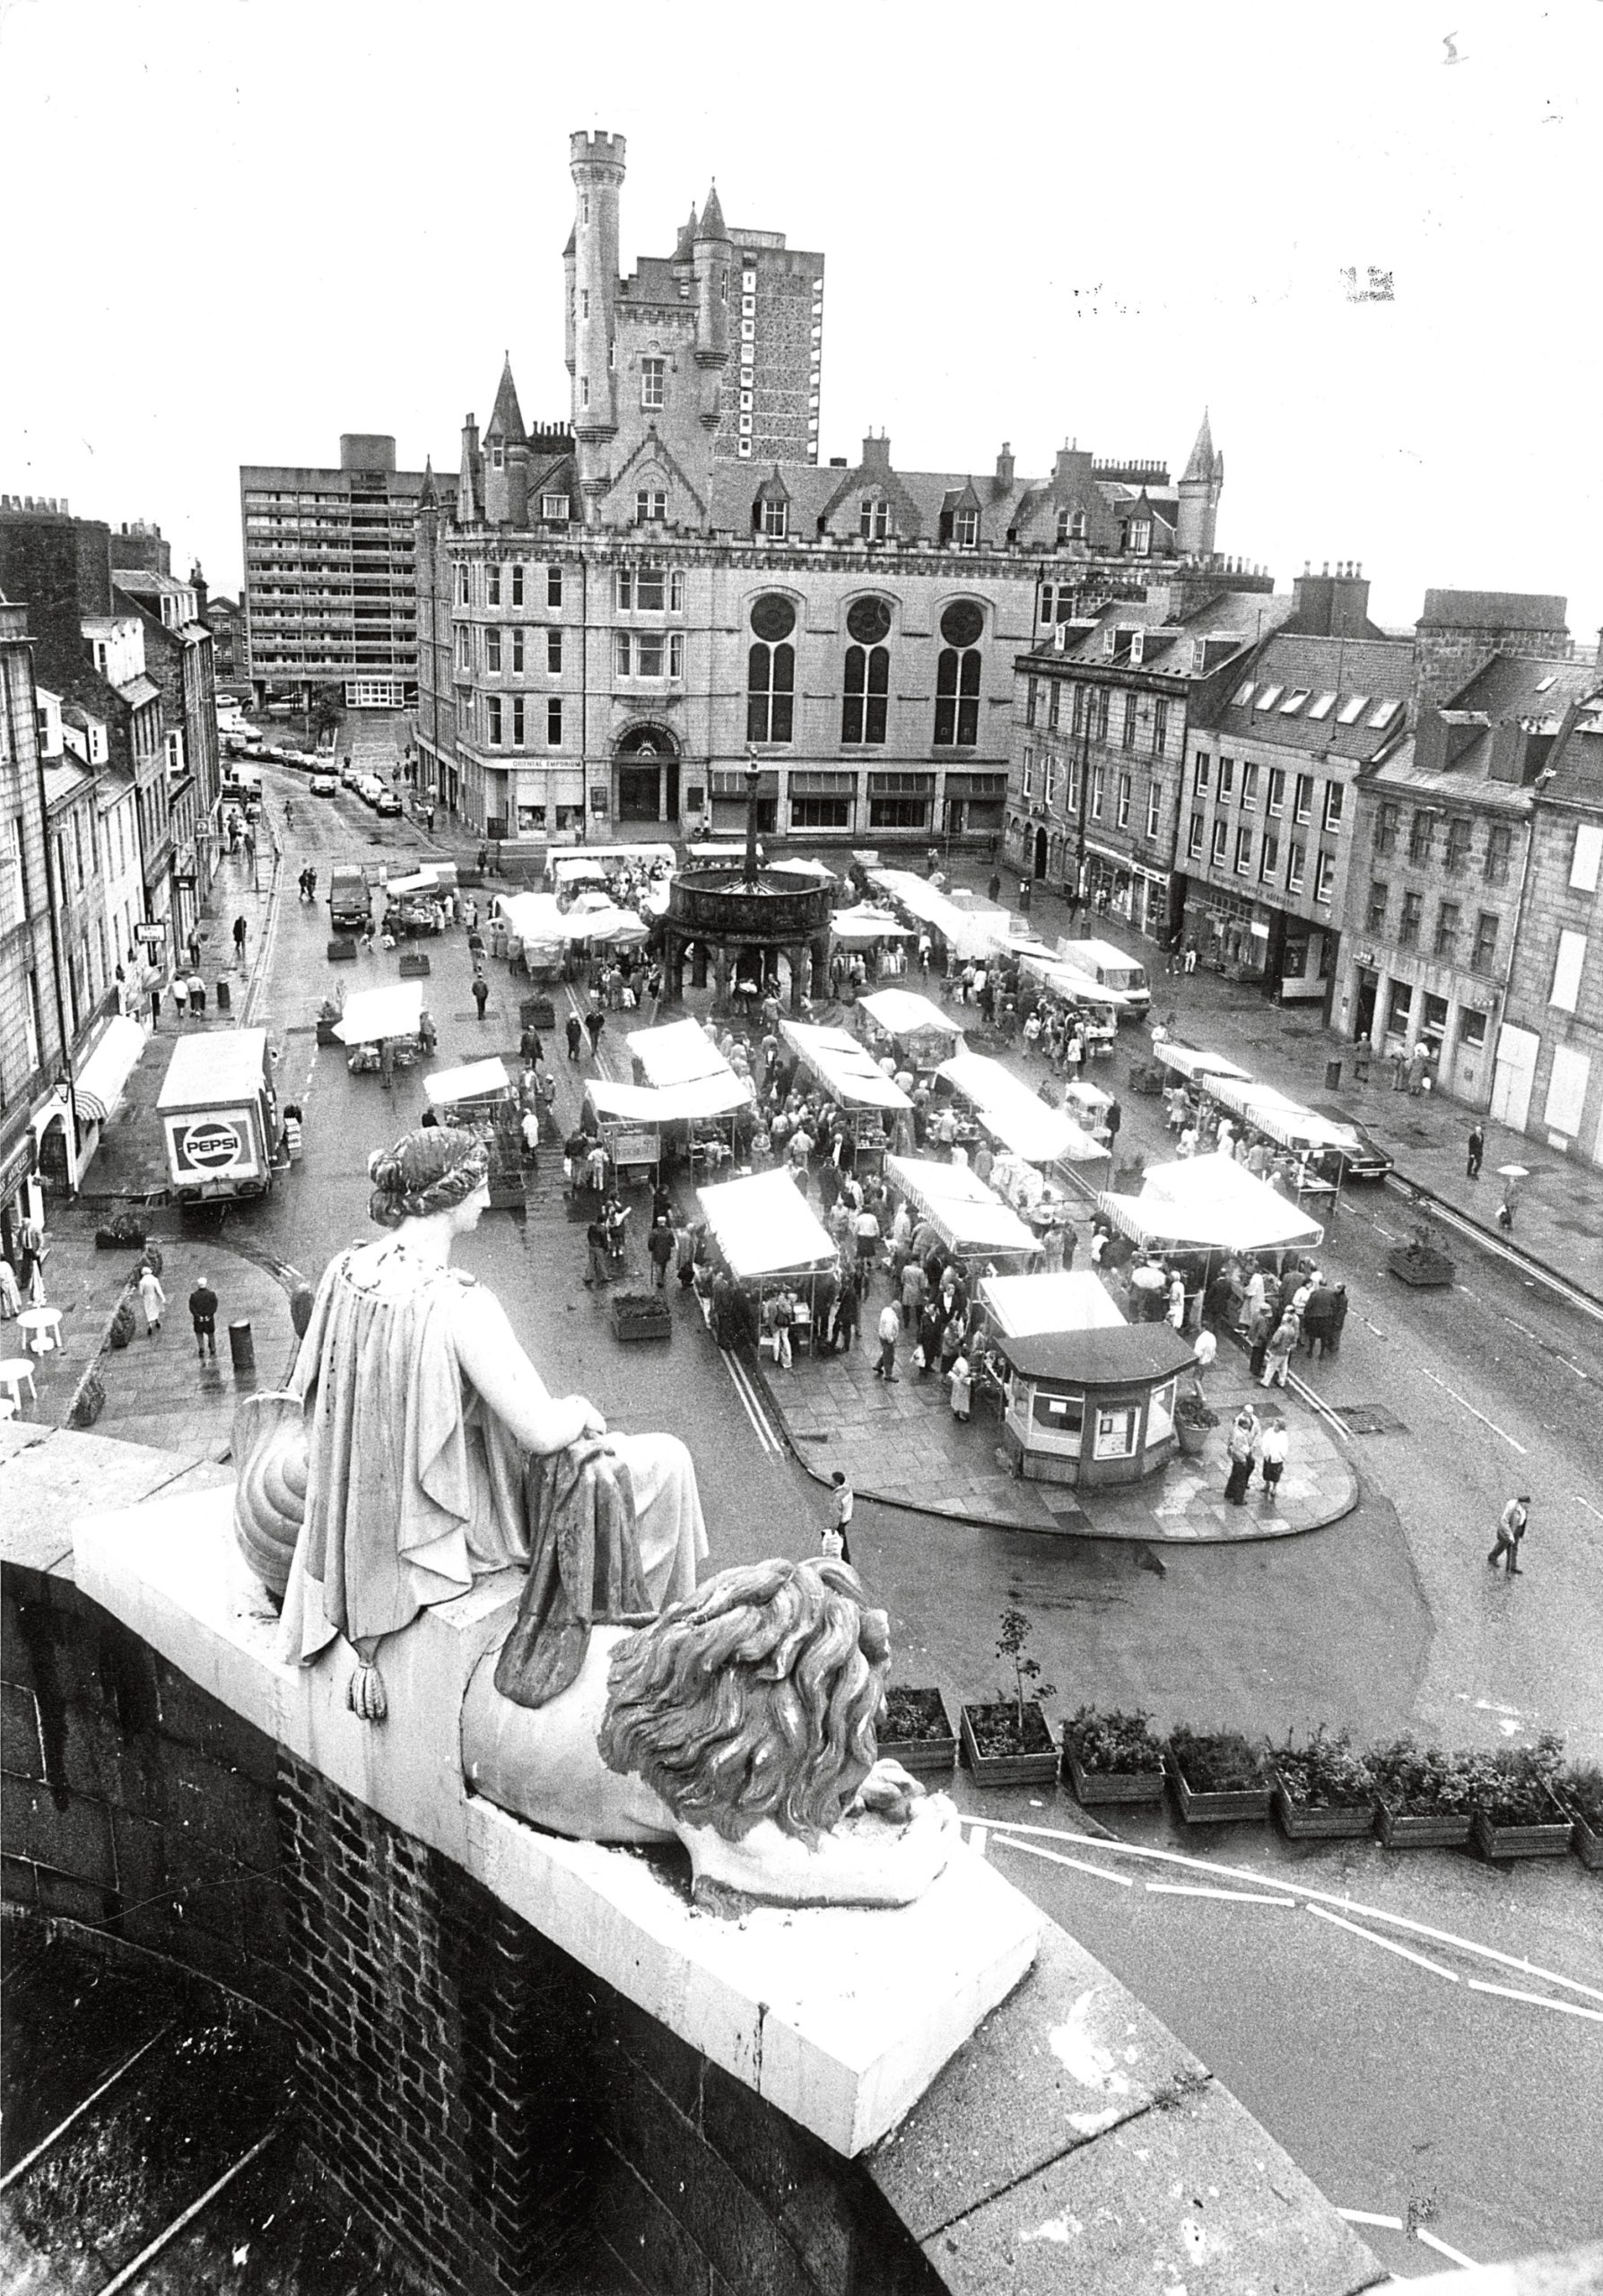 The Goddess of Plenty surveys the Castlegate Market from the roof of the Clydesdale Bank Chief Office on the first day of the market in 1988.